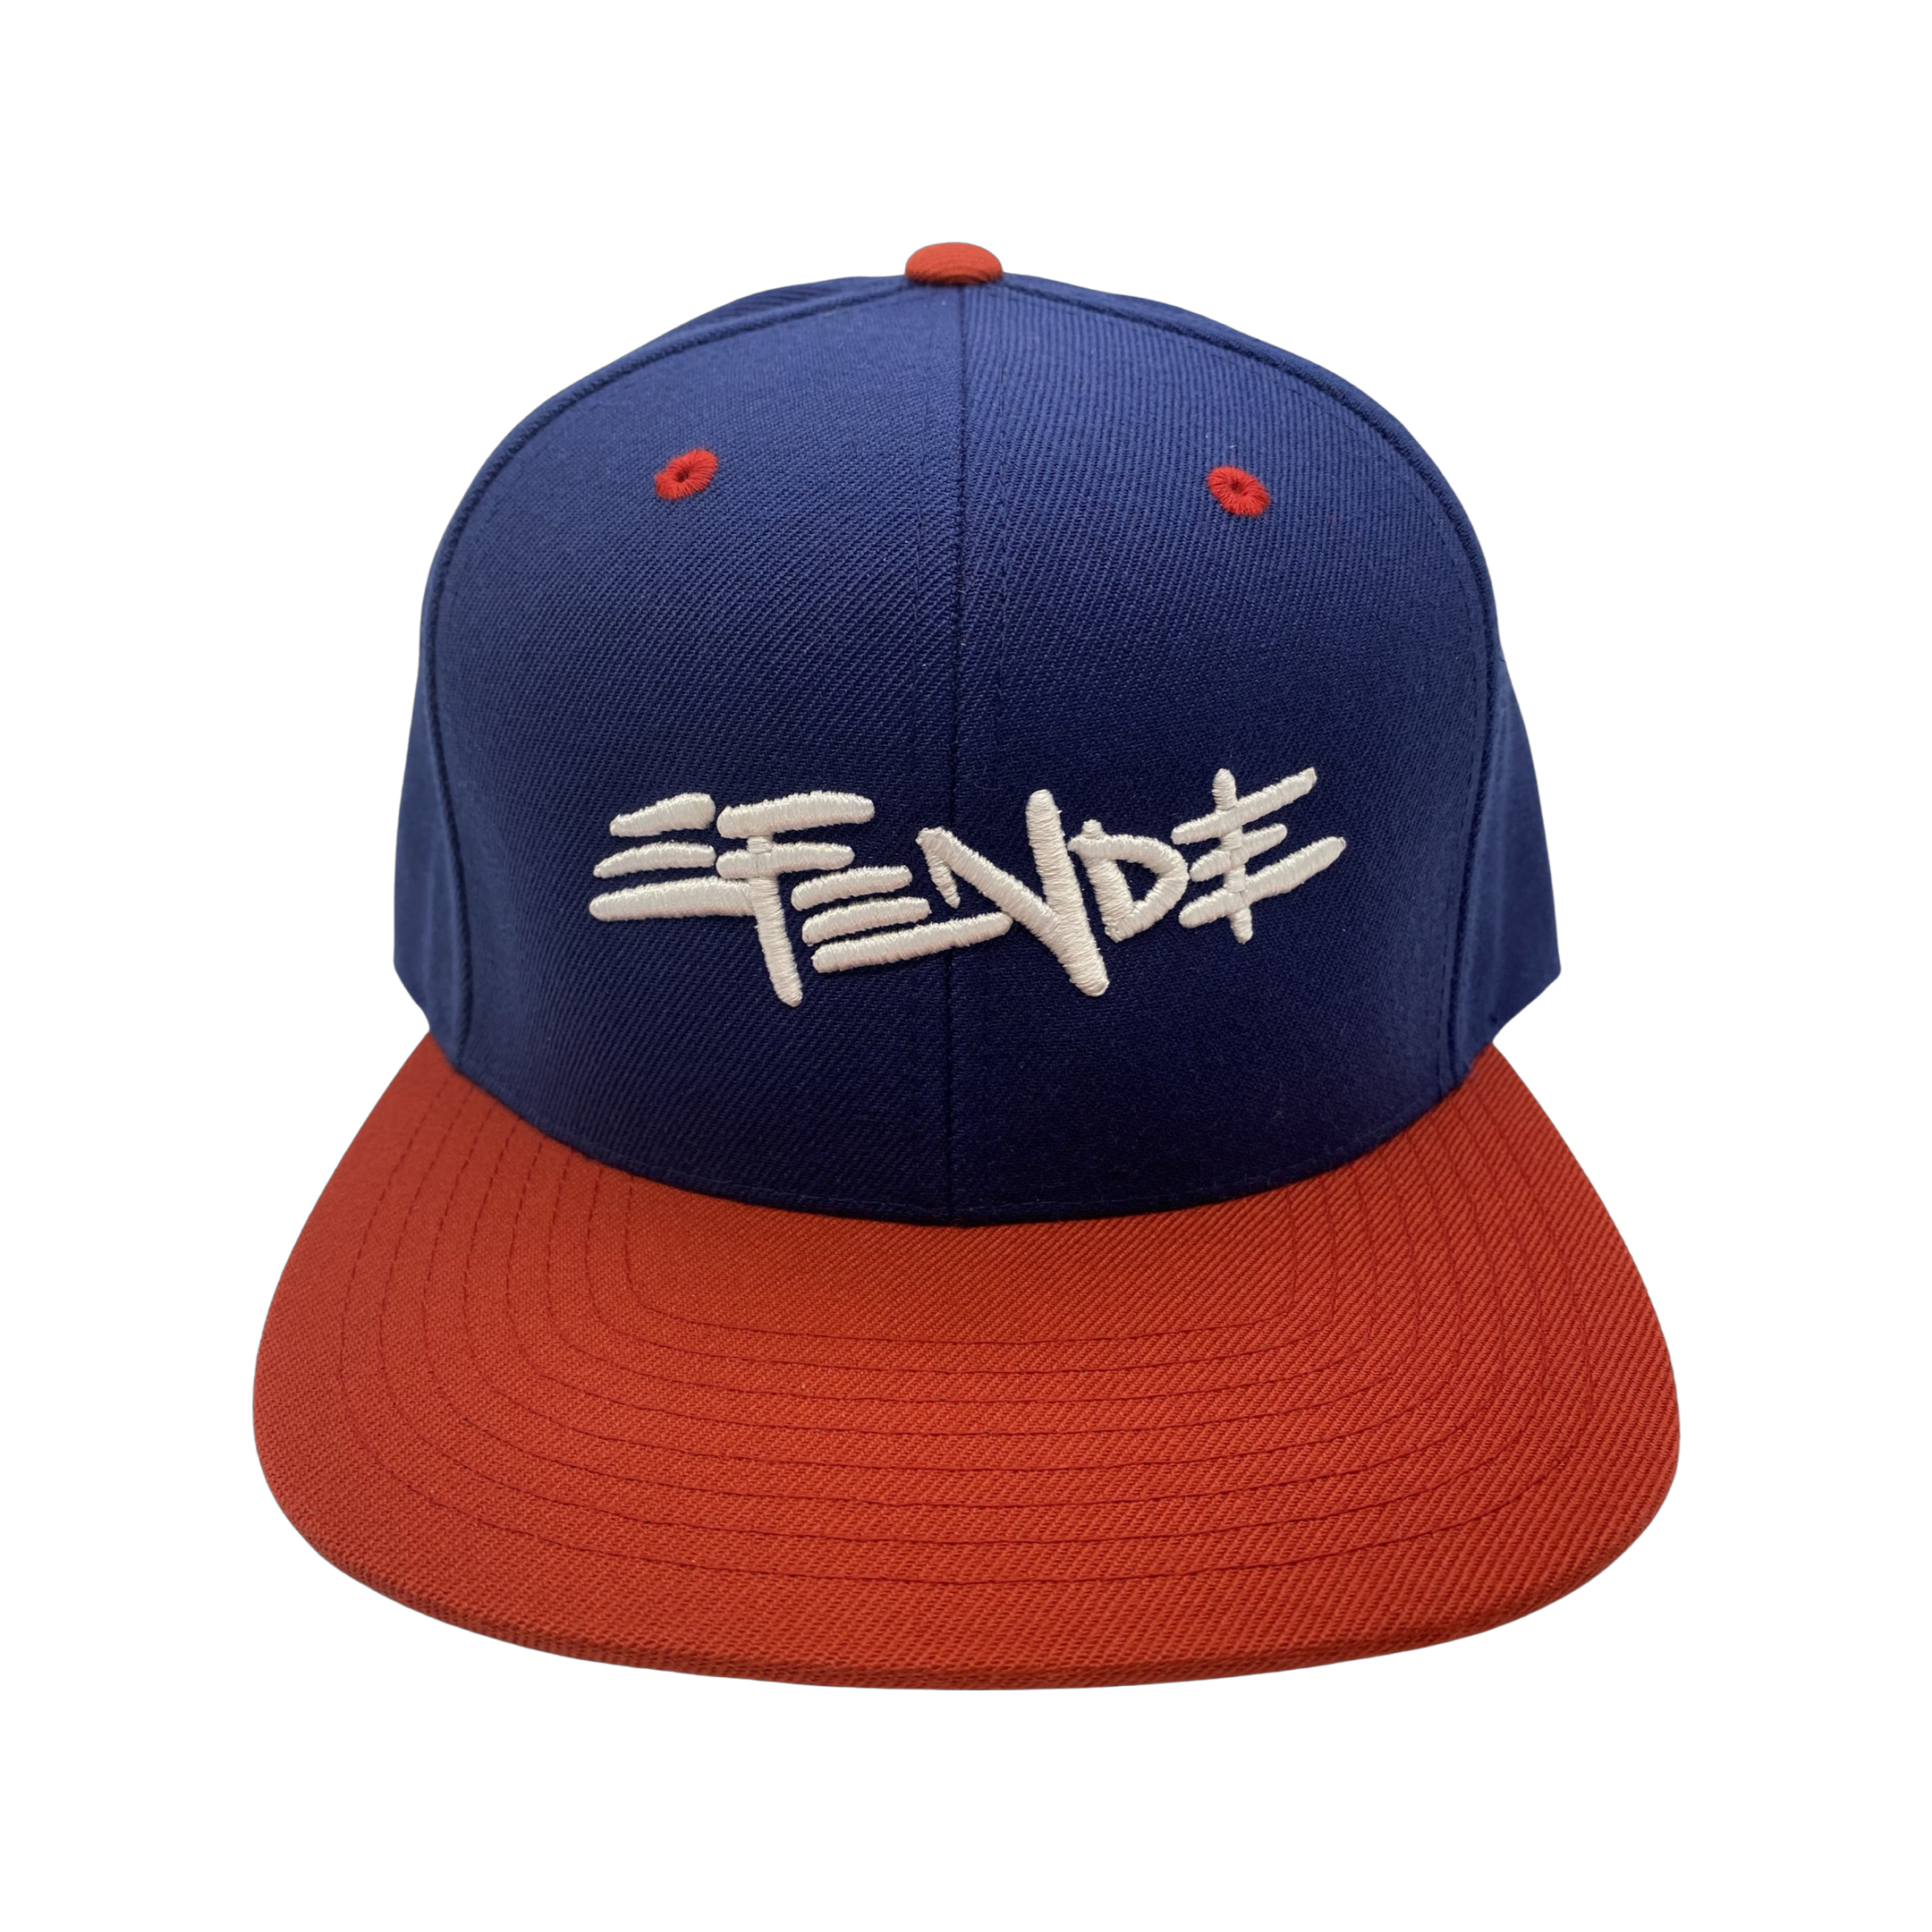 Classic Snapback - Red & Blue